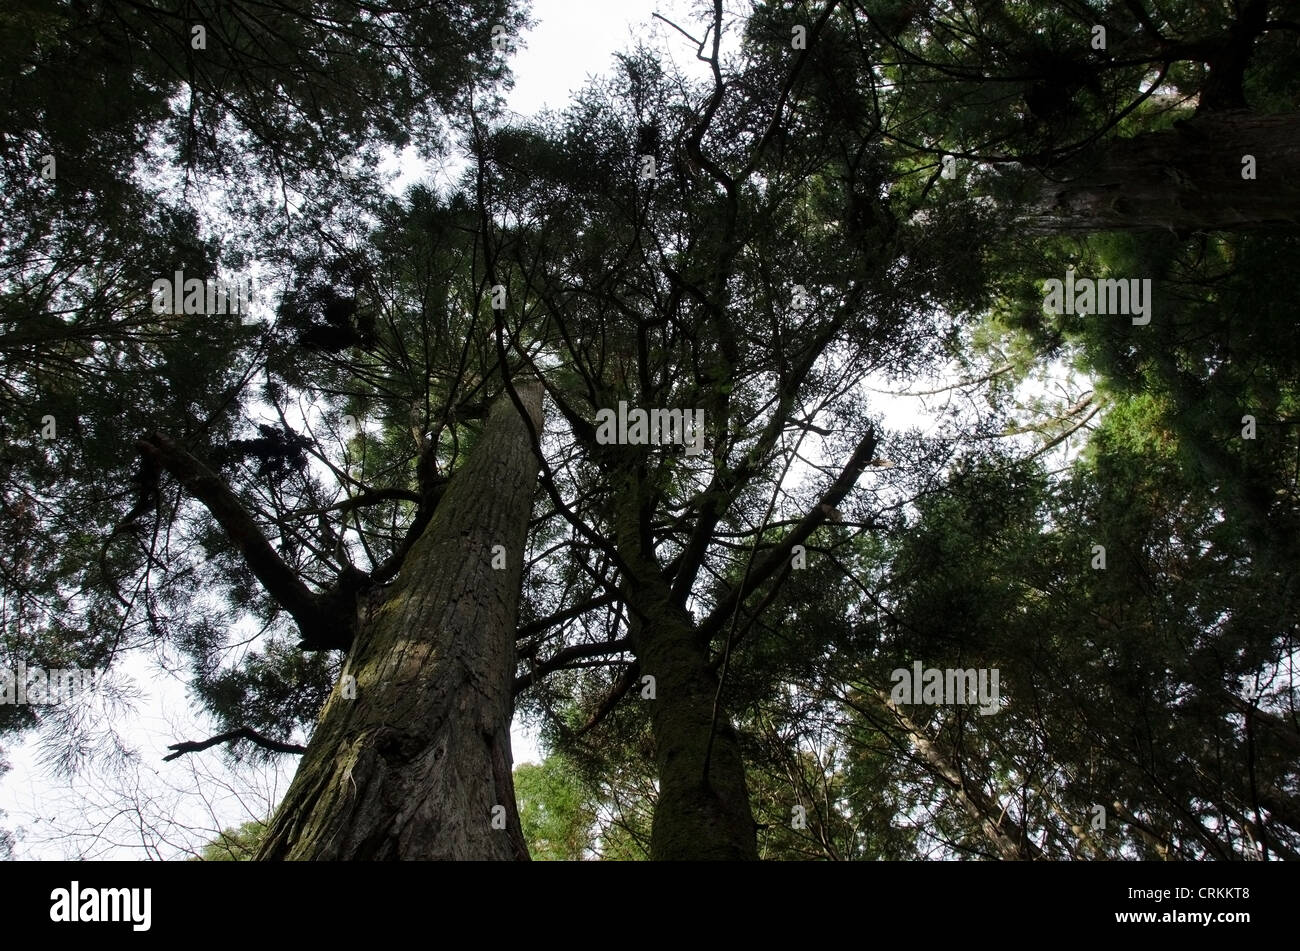 Tall japanese pine tree seen from below Stock Photo